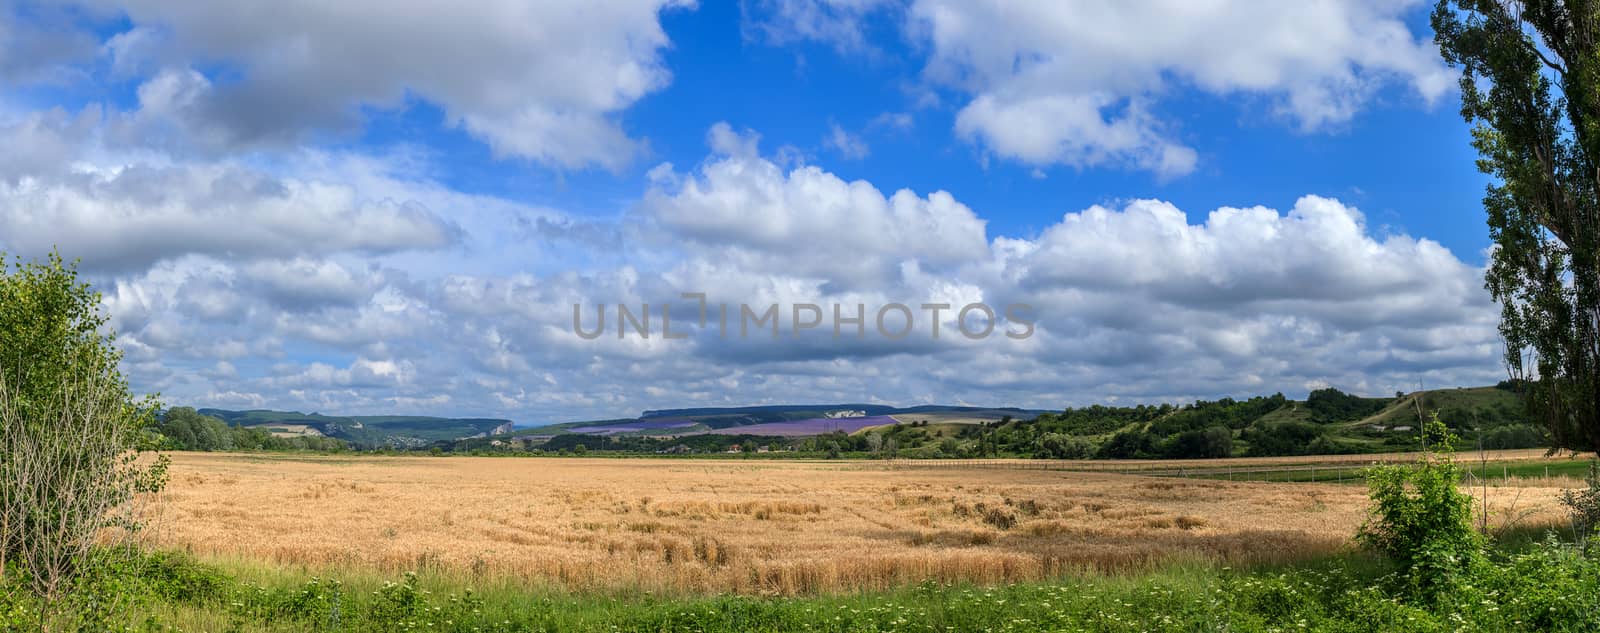 panoramic shot of a wheat field on a background cloudy sky